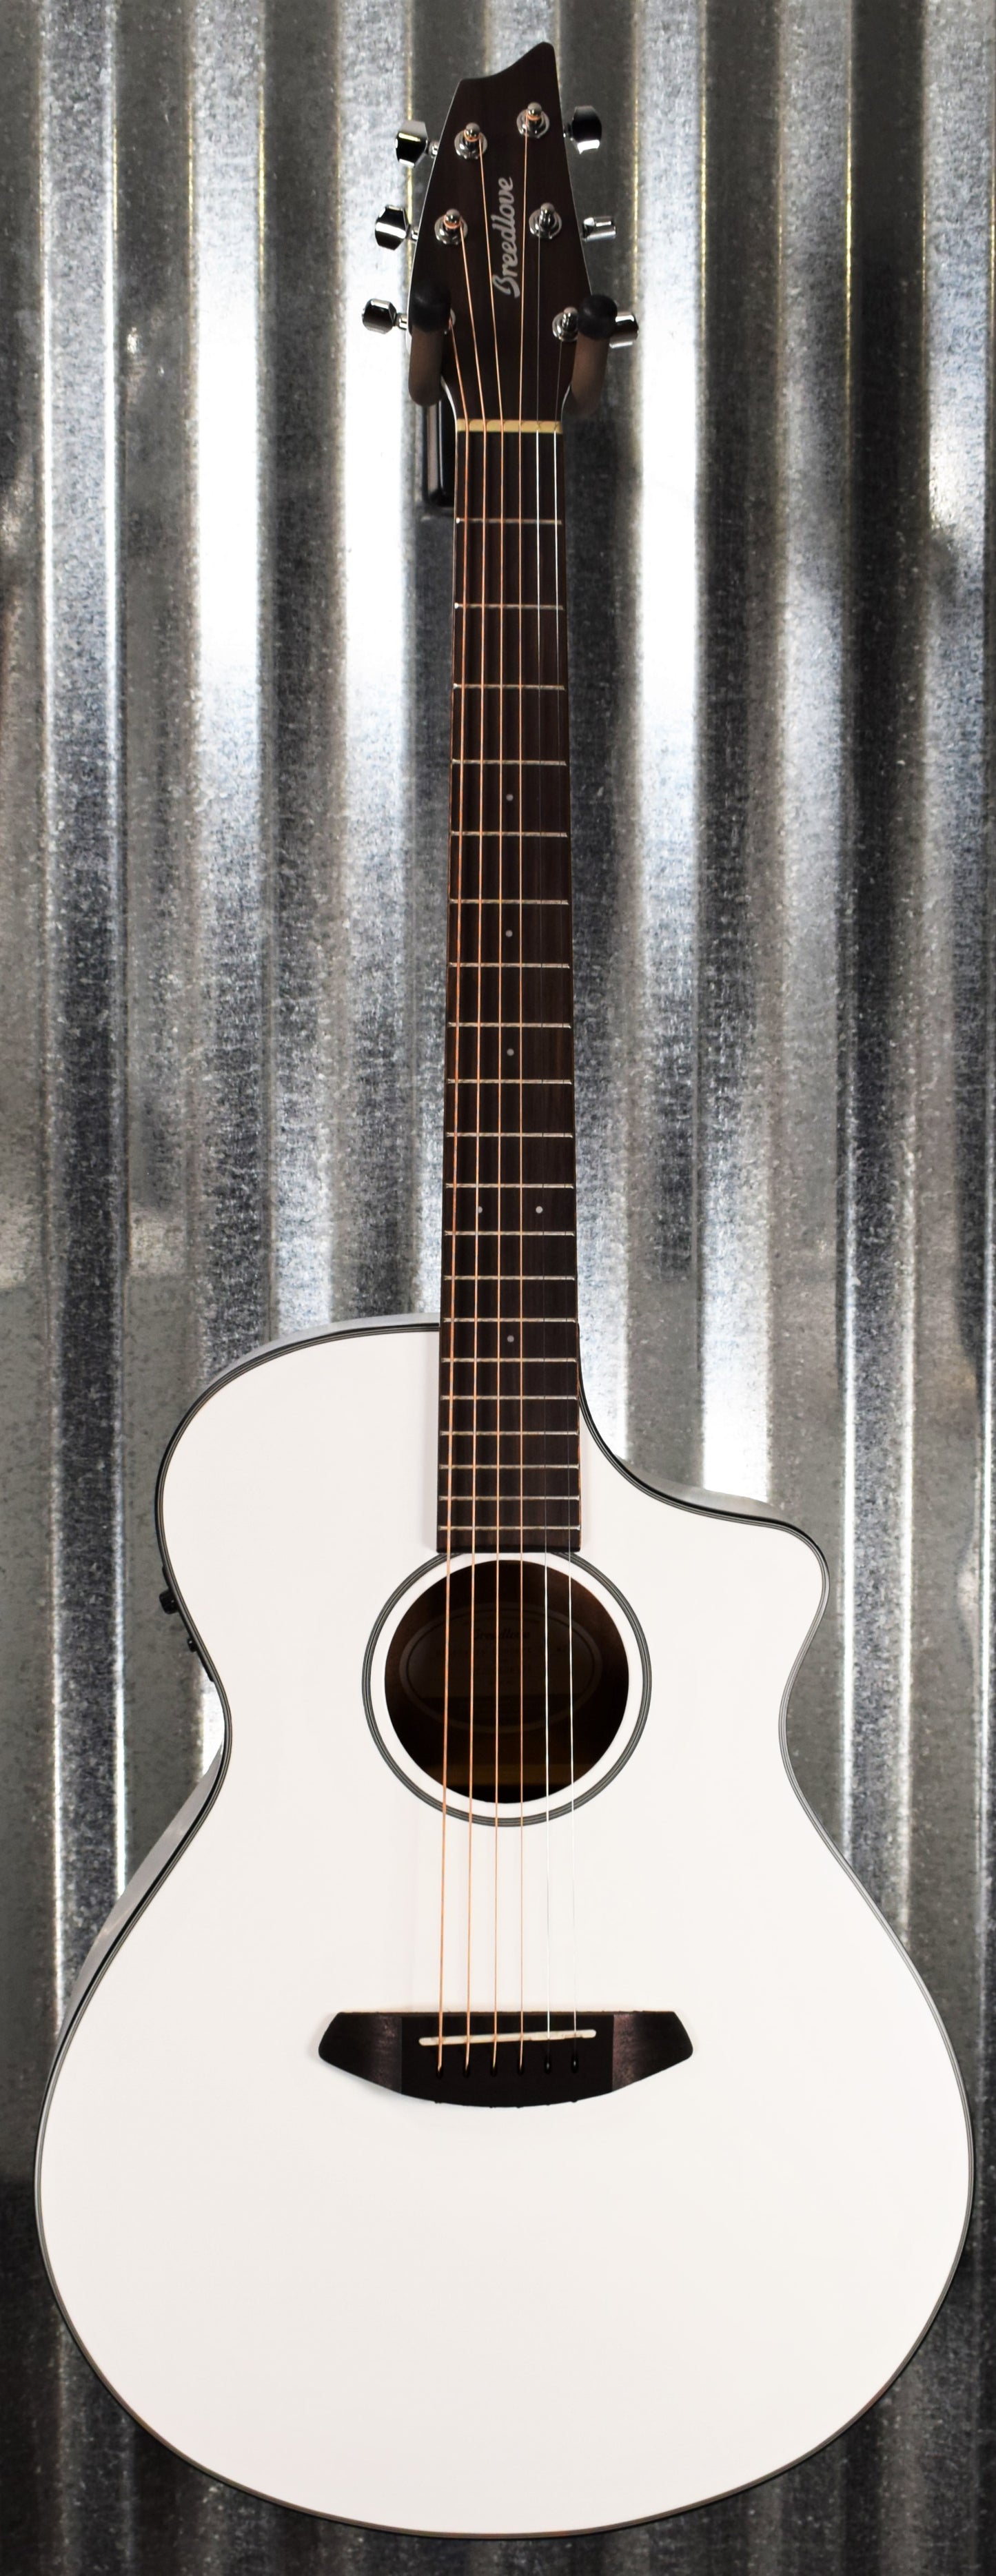 Breedlove Discovery Concert Satin CE White Sitka-Mahogany Acoustic Electric Guitar B Stock #6375